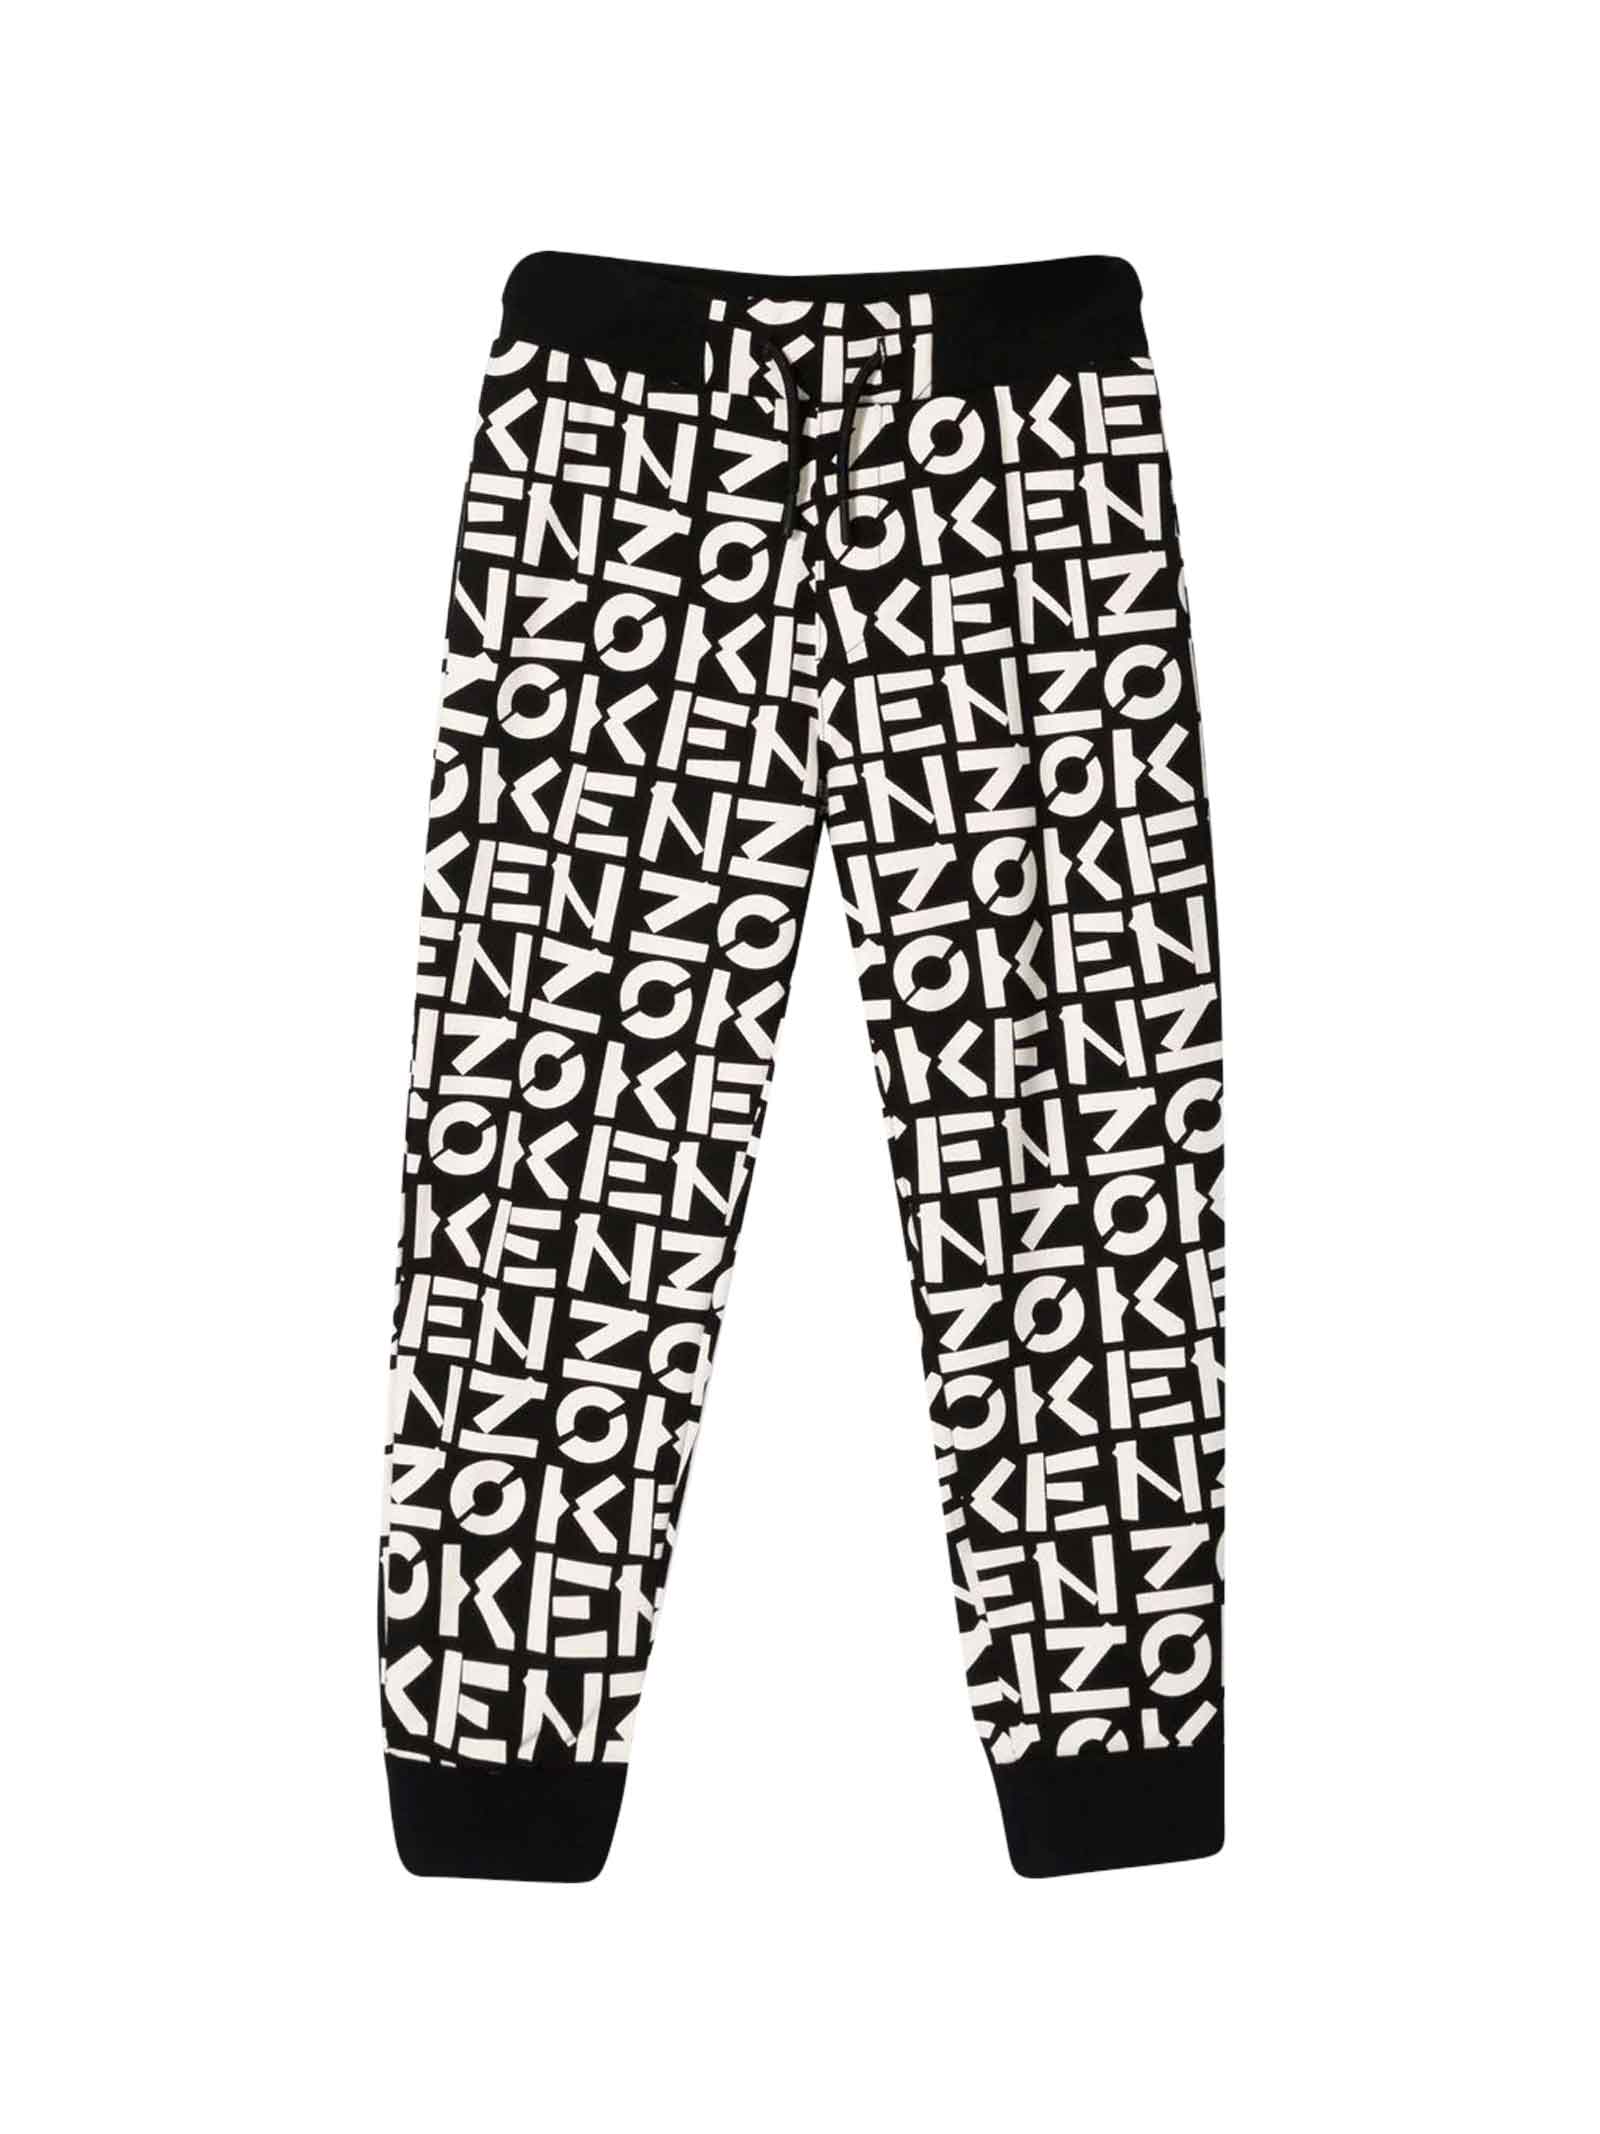 Kenzo Kids Black And White Boys Sports Trousers, All-over Logo Print, Drawstring Waist, Straight Cut And Elasticated Cuffs By.